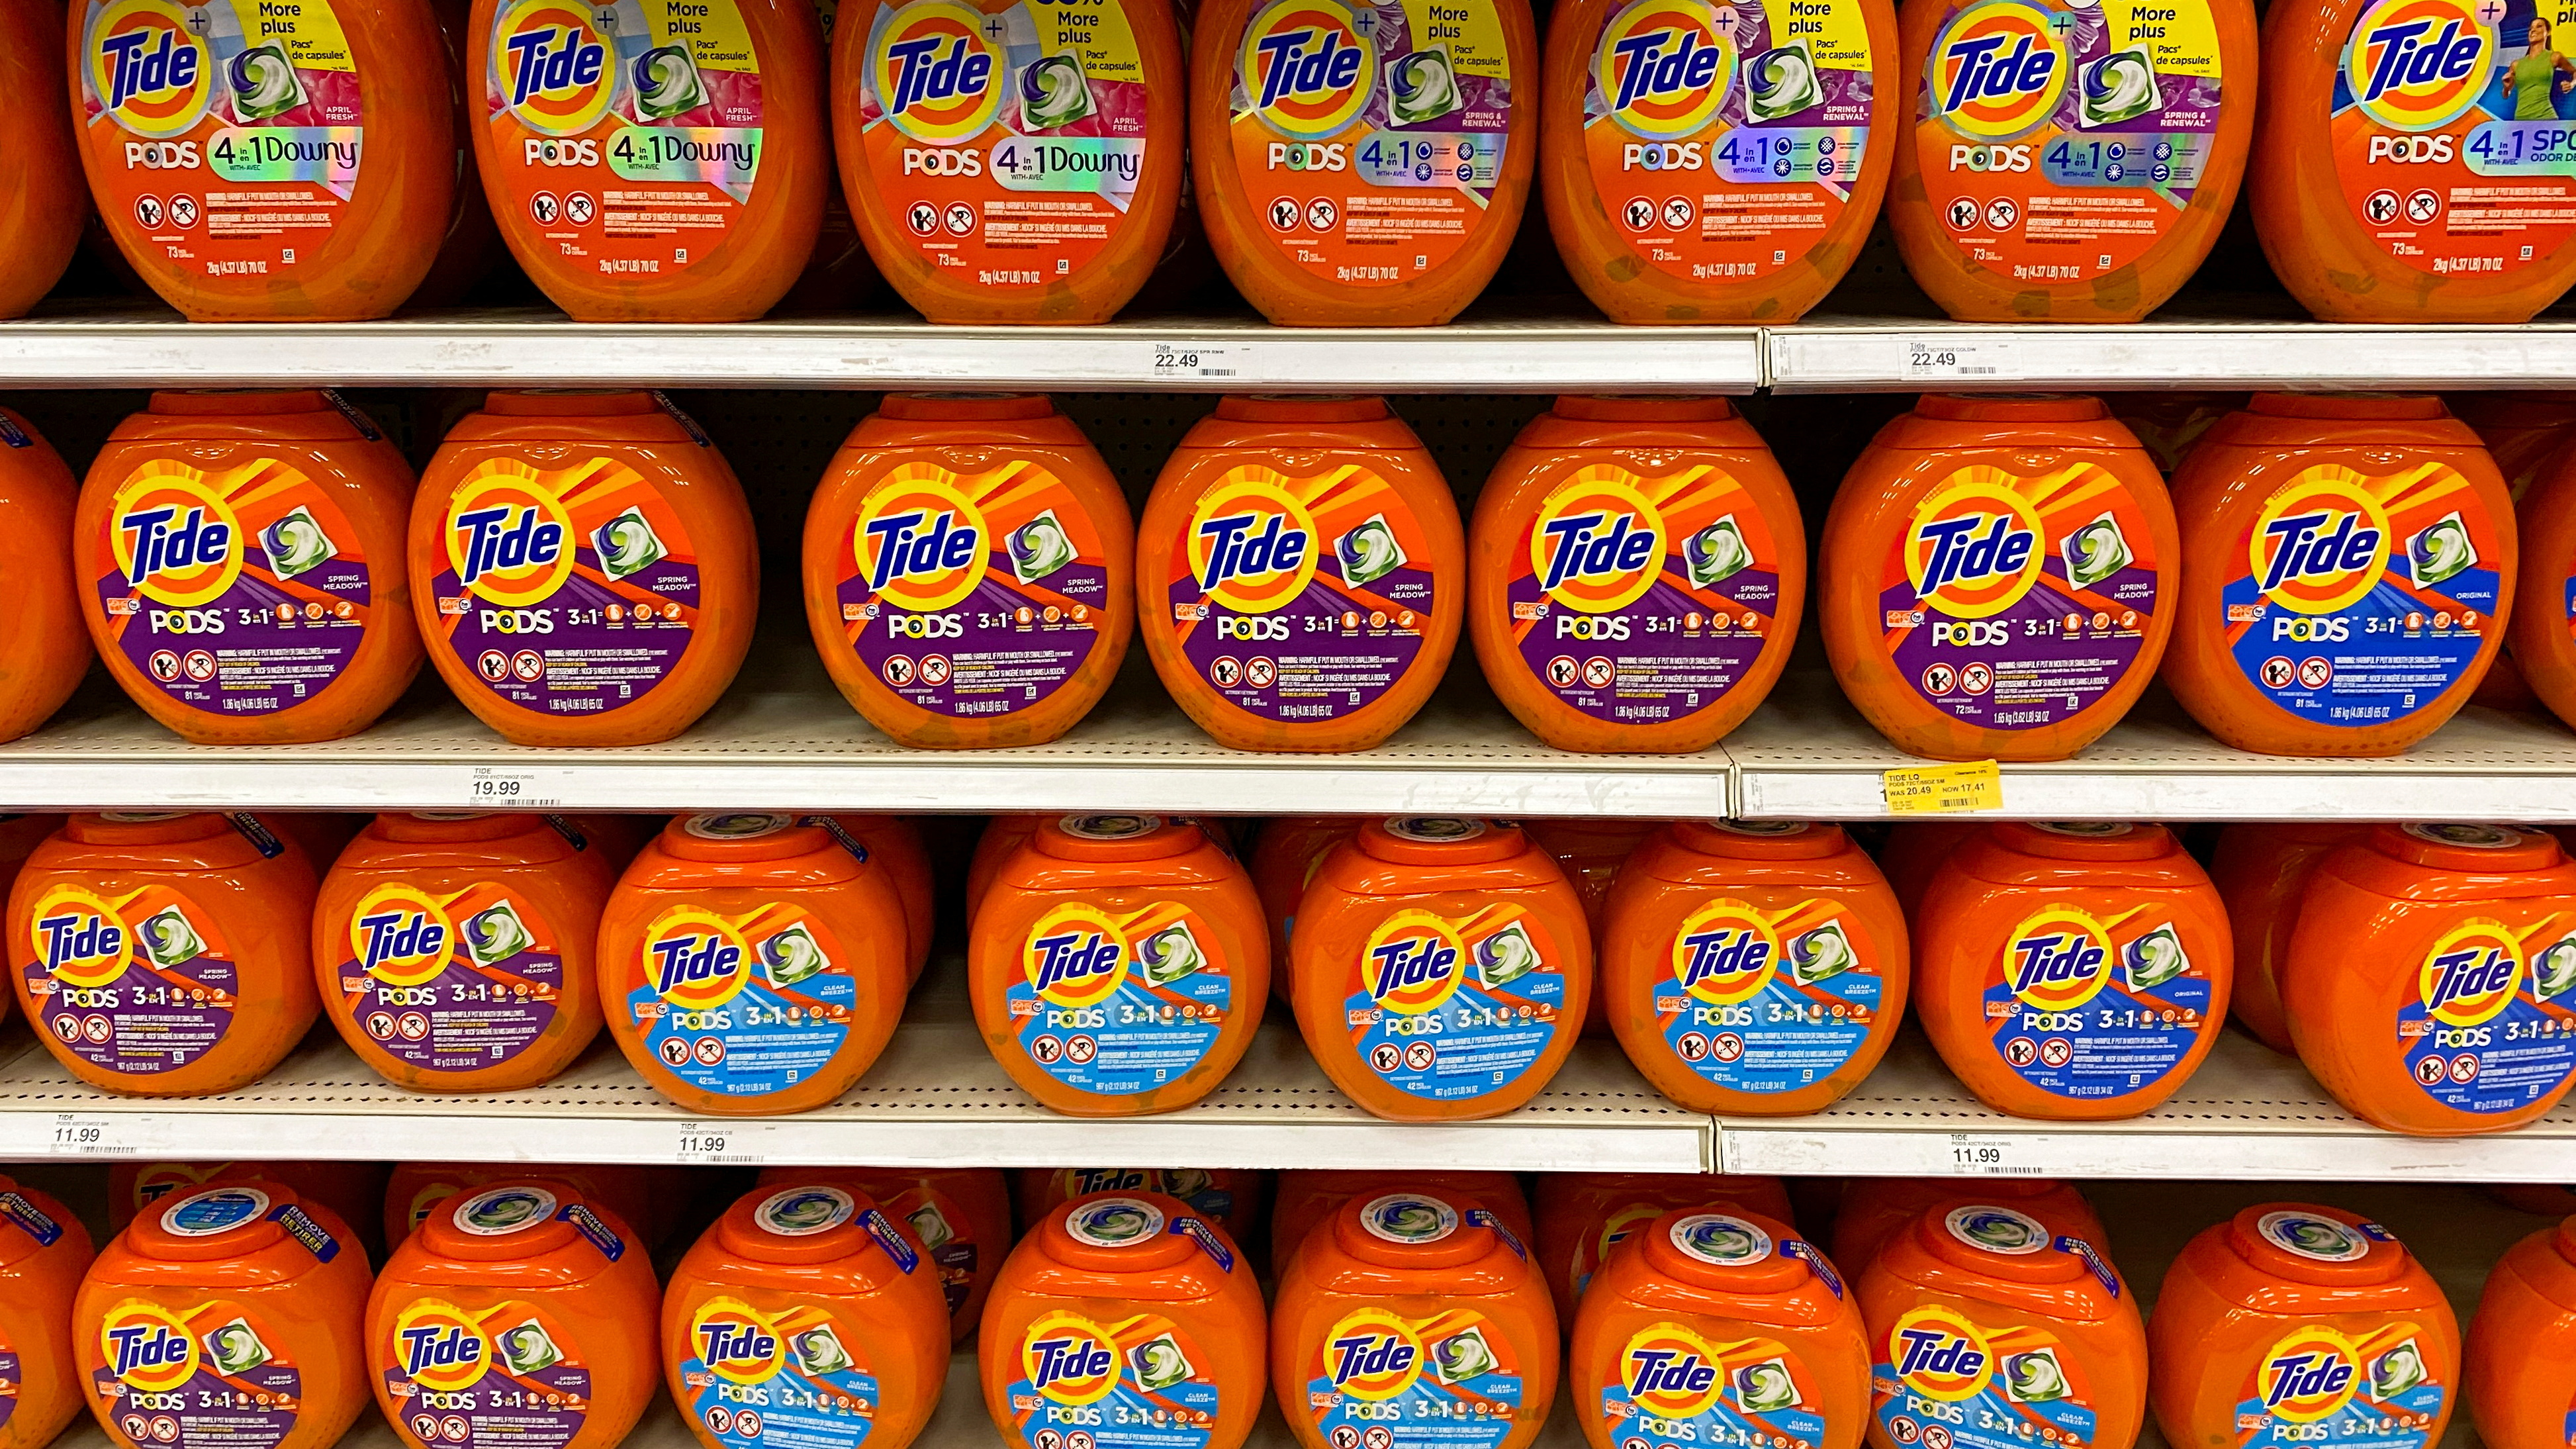 Tide laundry pods made by Procter and Gamble are shown for sale in California